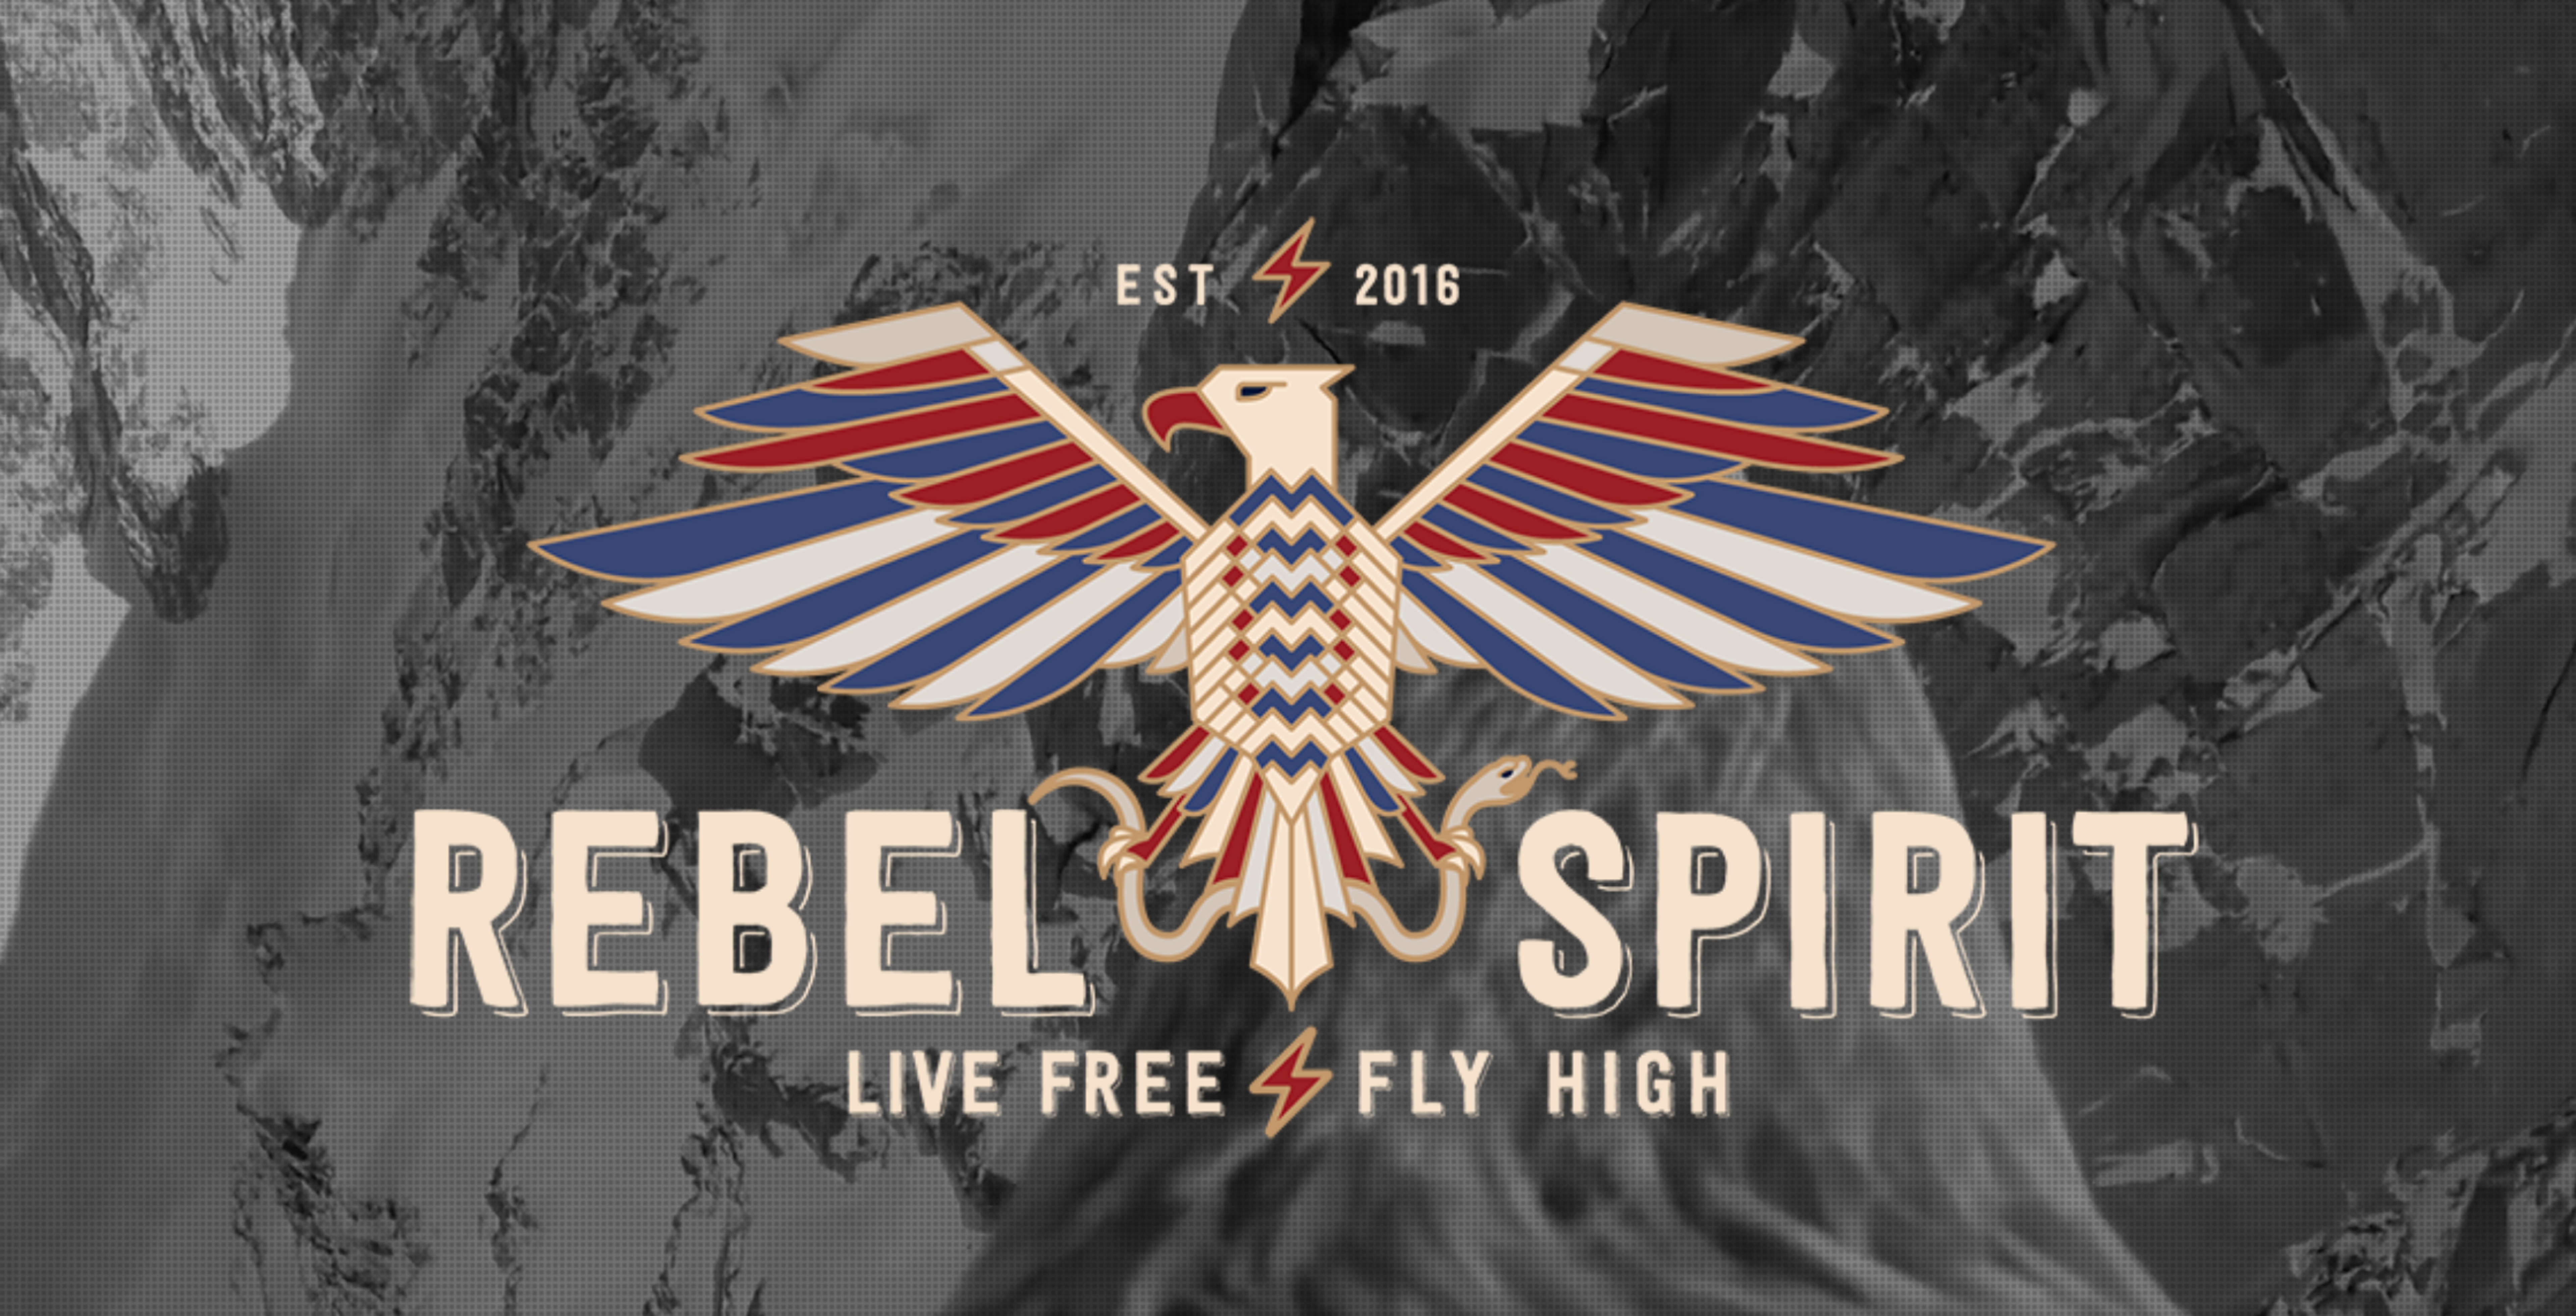 From Humble Origins To $2M In Annual Revenues: Rebel Spirit Is Poised For Cannabis Growth